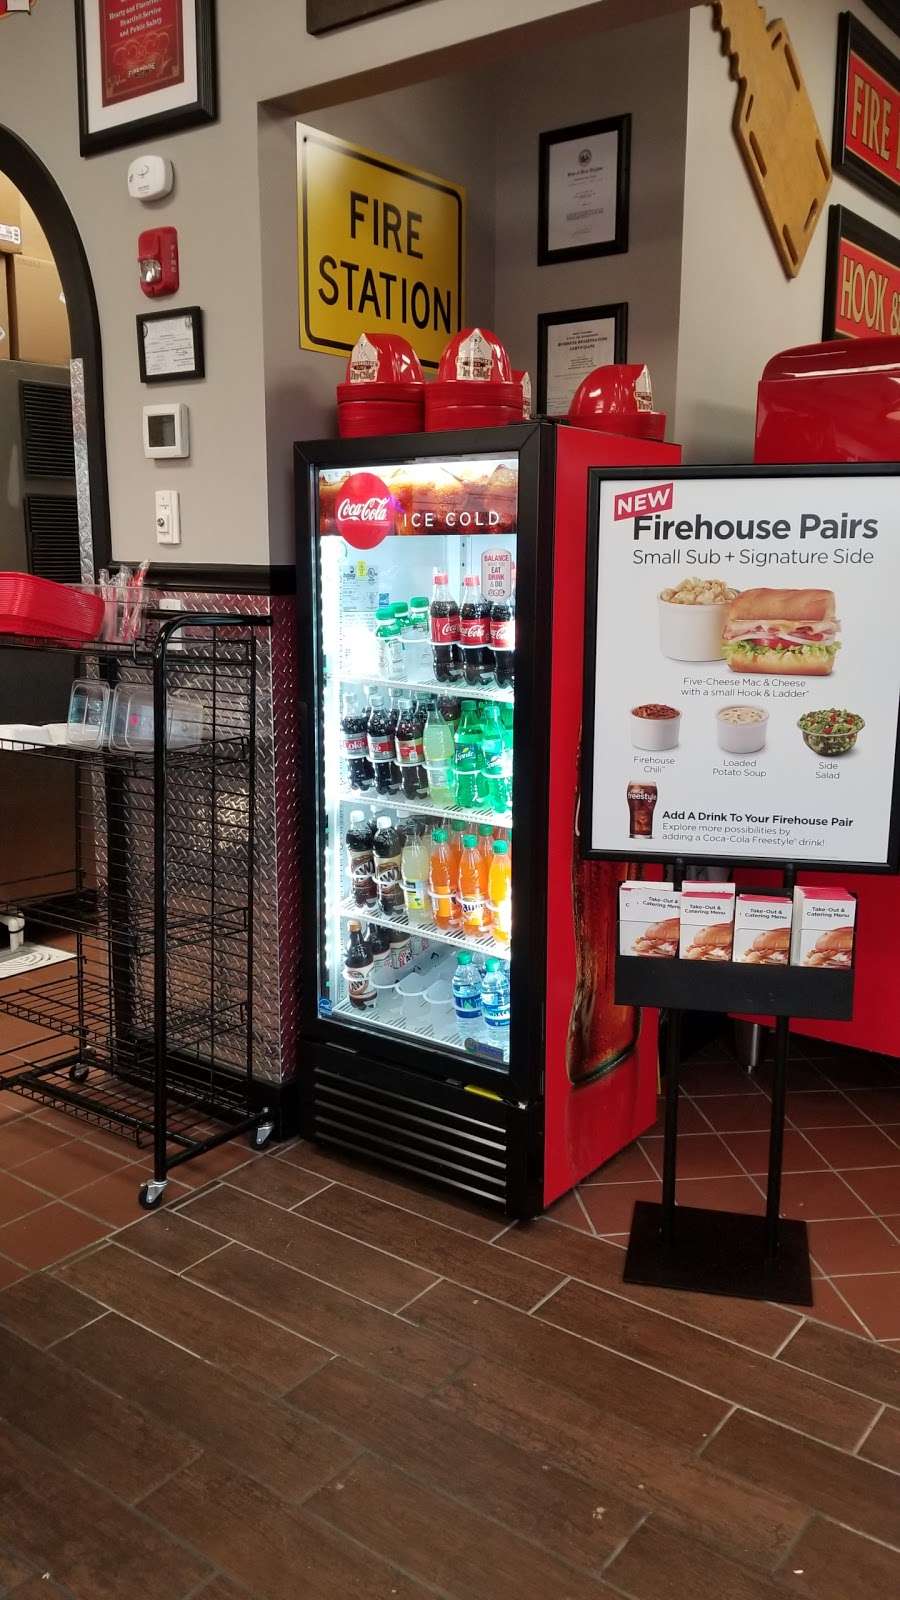 Firehouse Subs | 886 Foxcroft Ave #105, Martinsburg, WV 25401 | Phone: (681) 247-2823